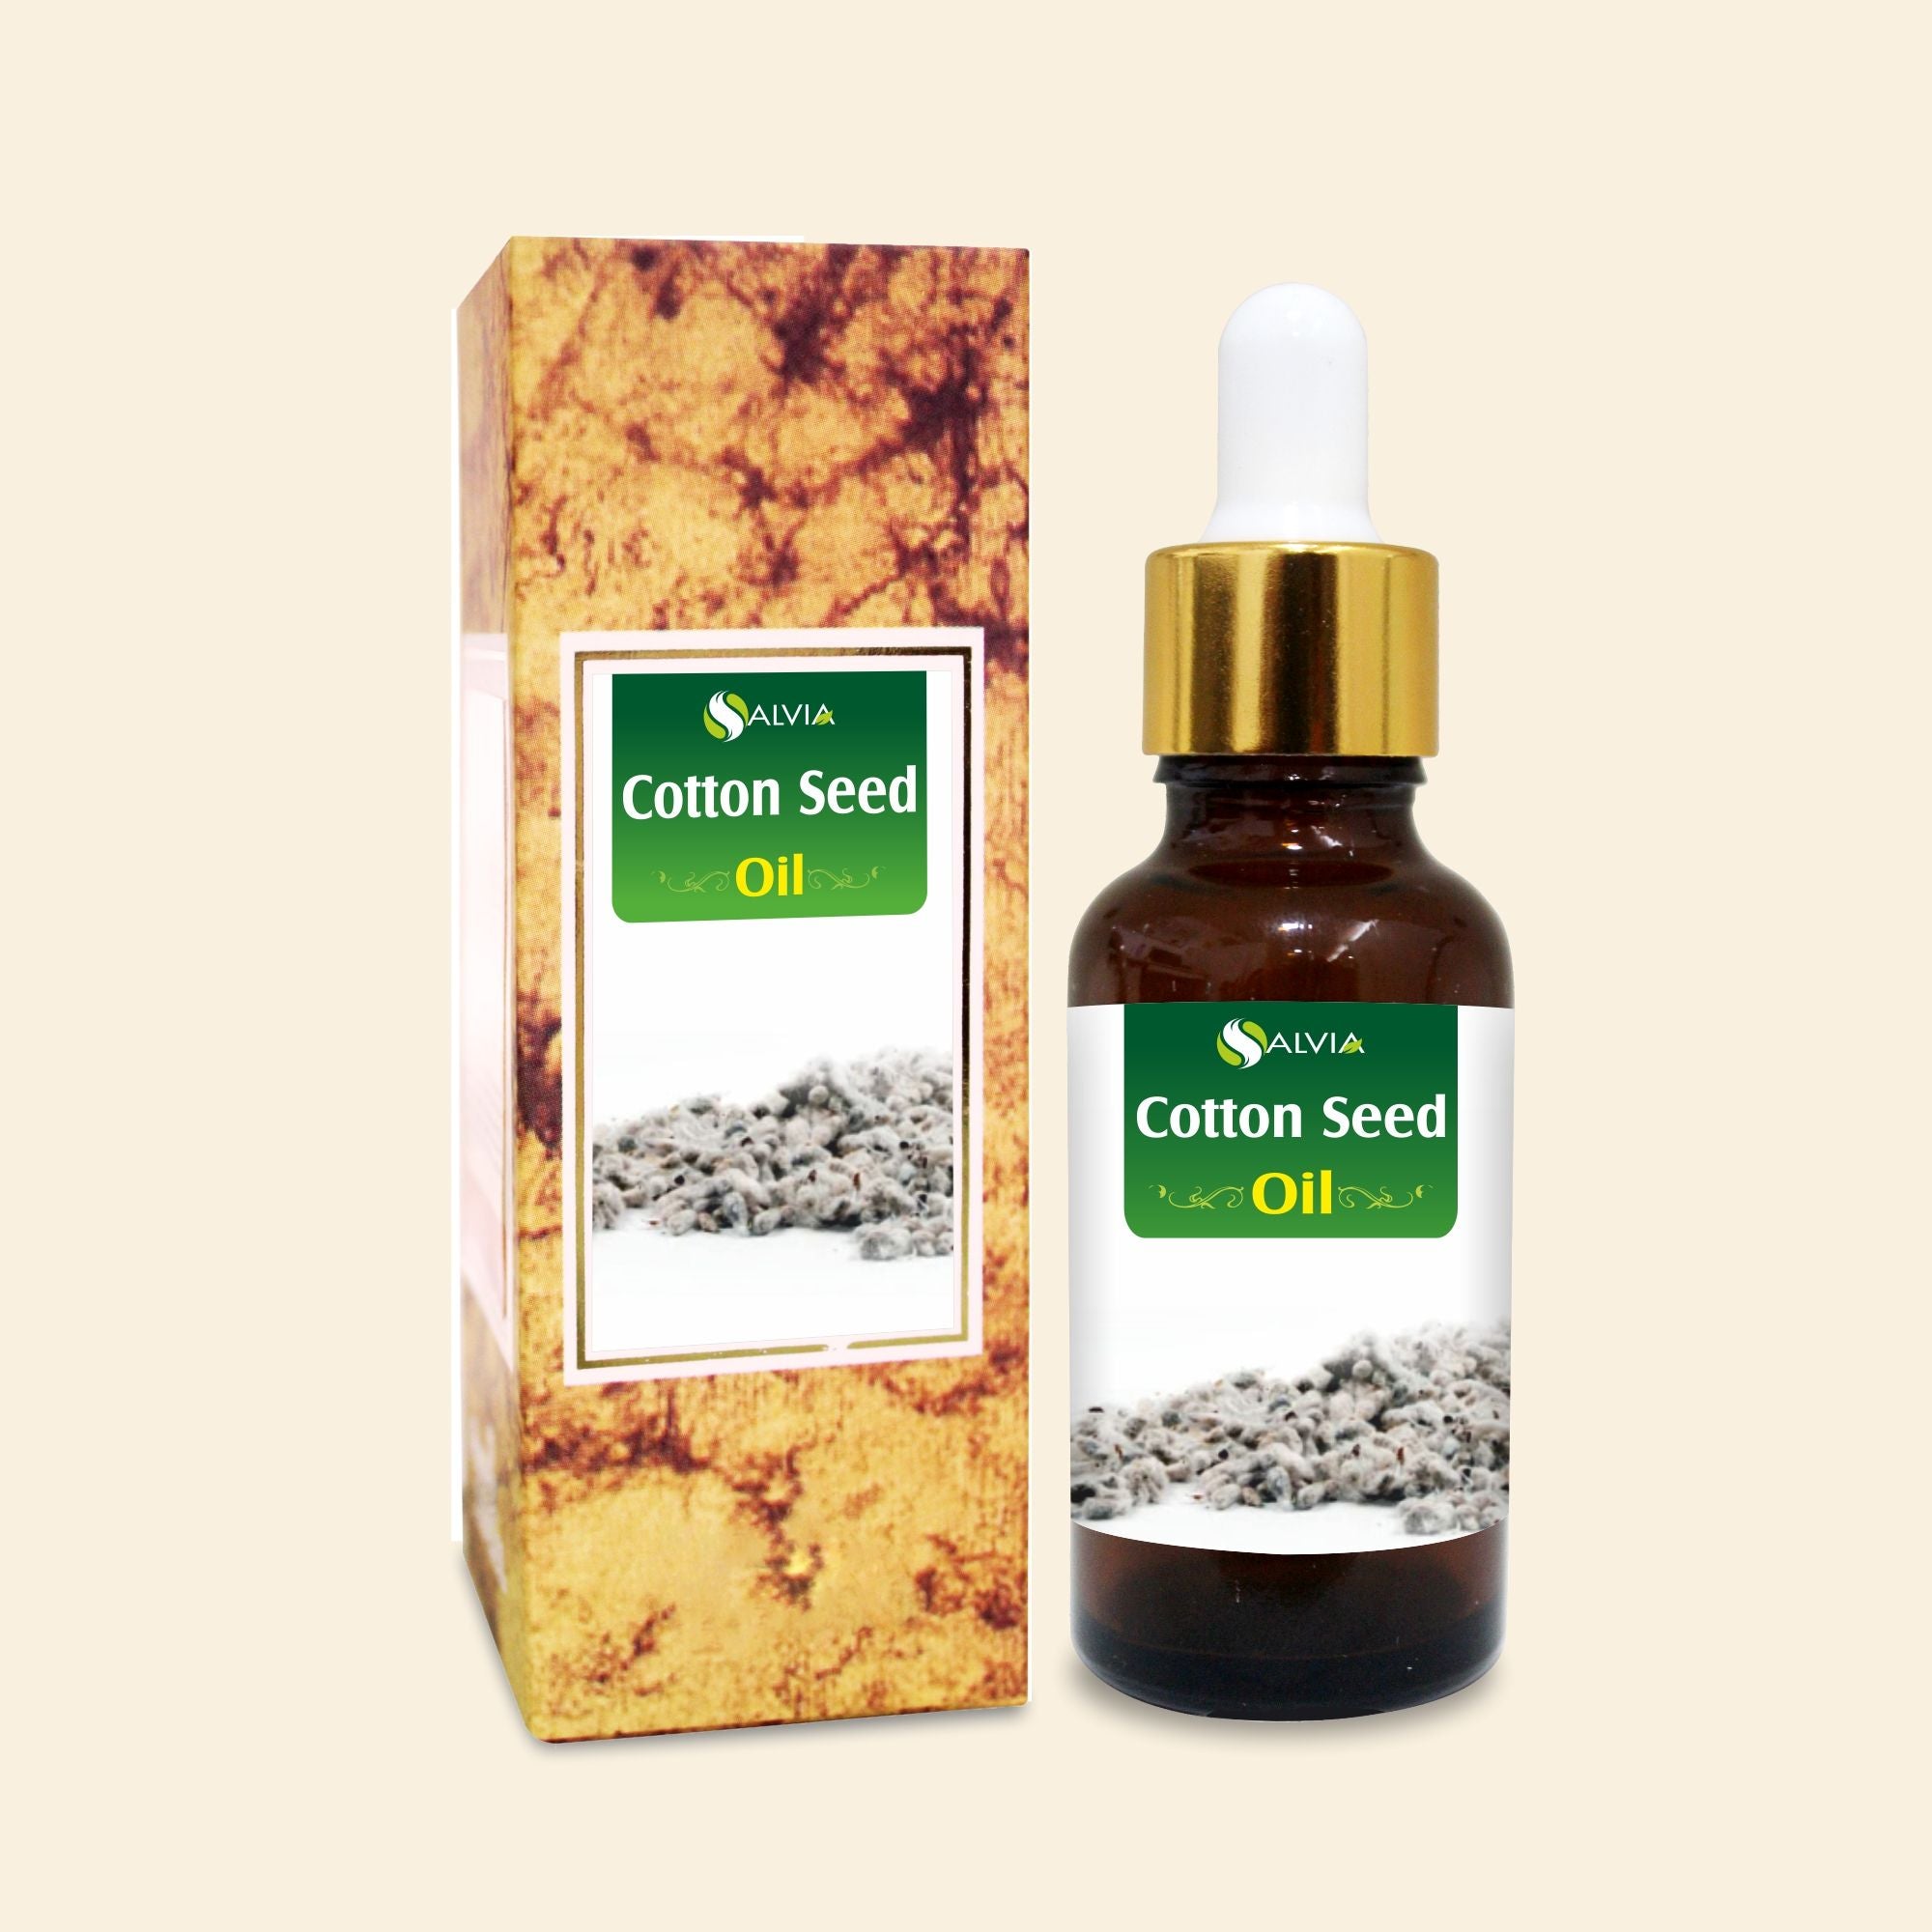 Salvia Natural Carrier Oils Cotton Seed Oil